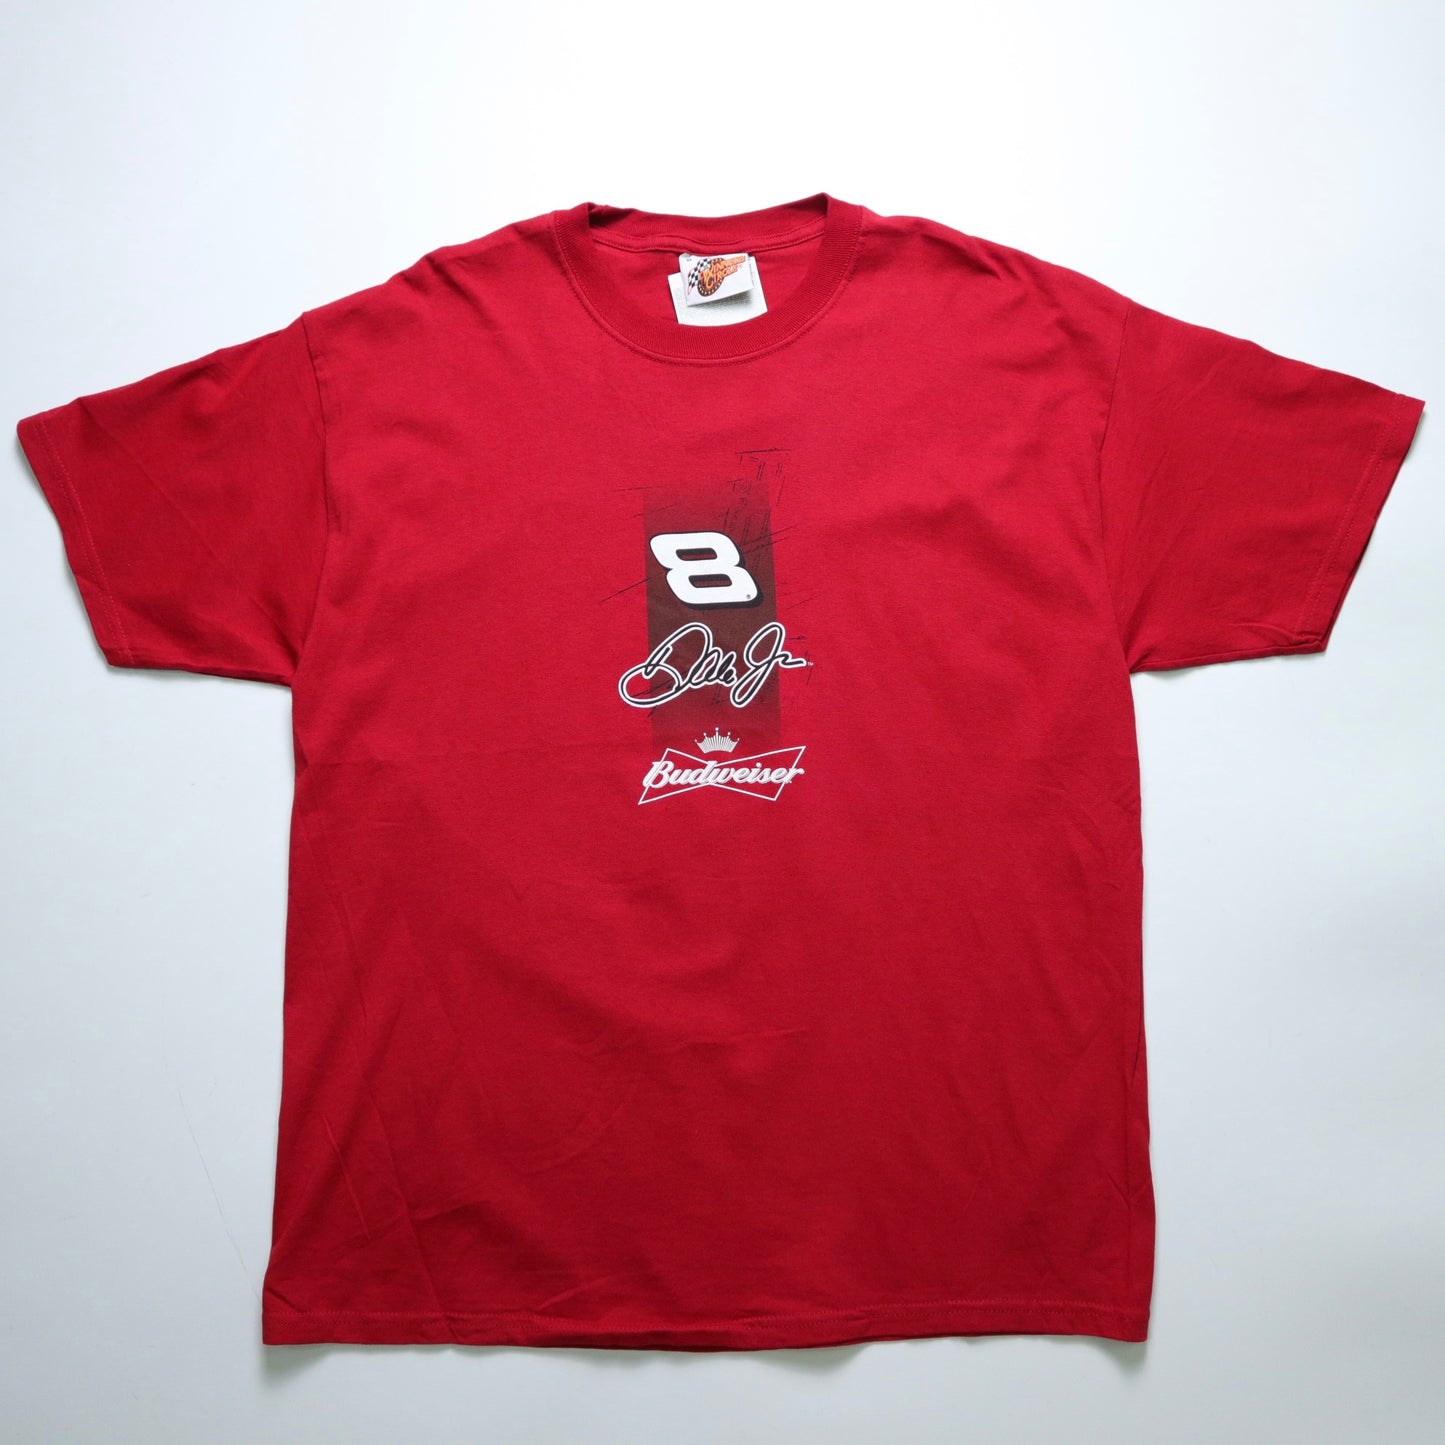 Budweiser Racing Offset Tee New Products in Stock